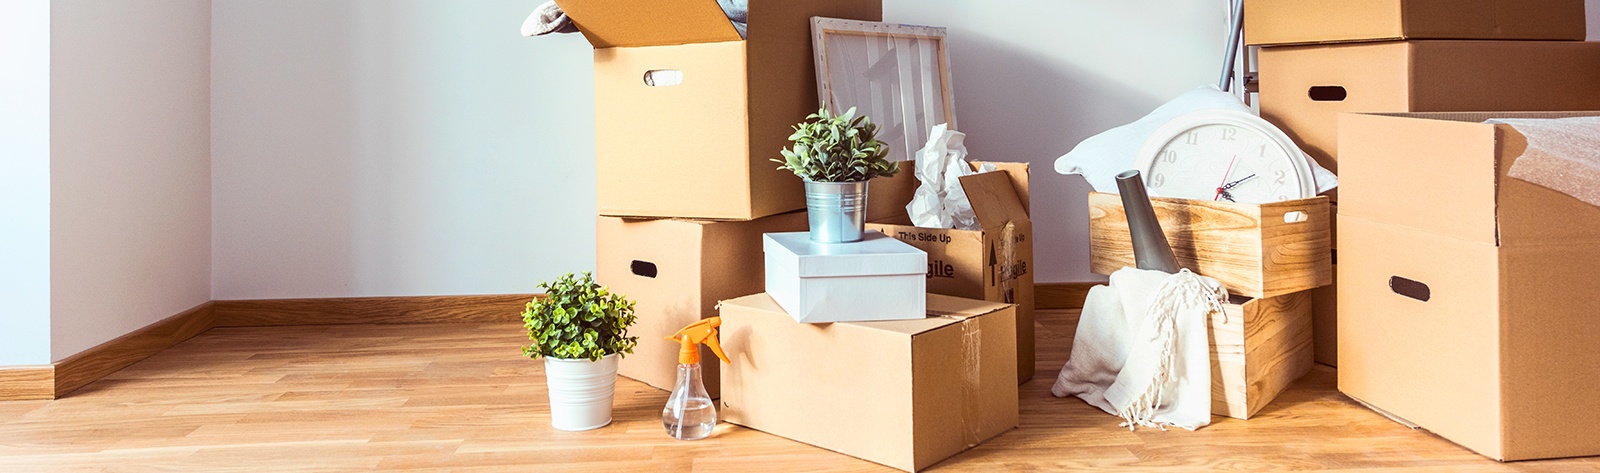 Move-In/ Move-Out Cleaning Services